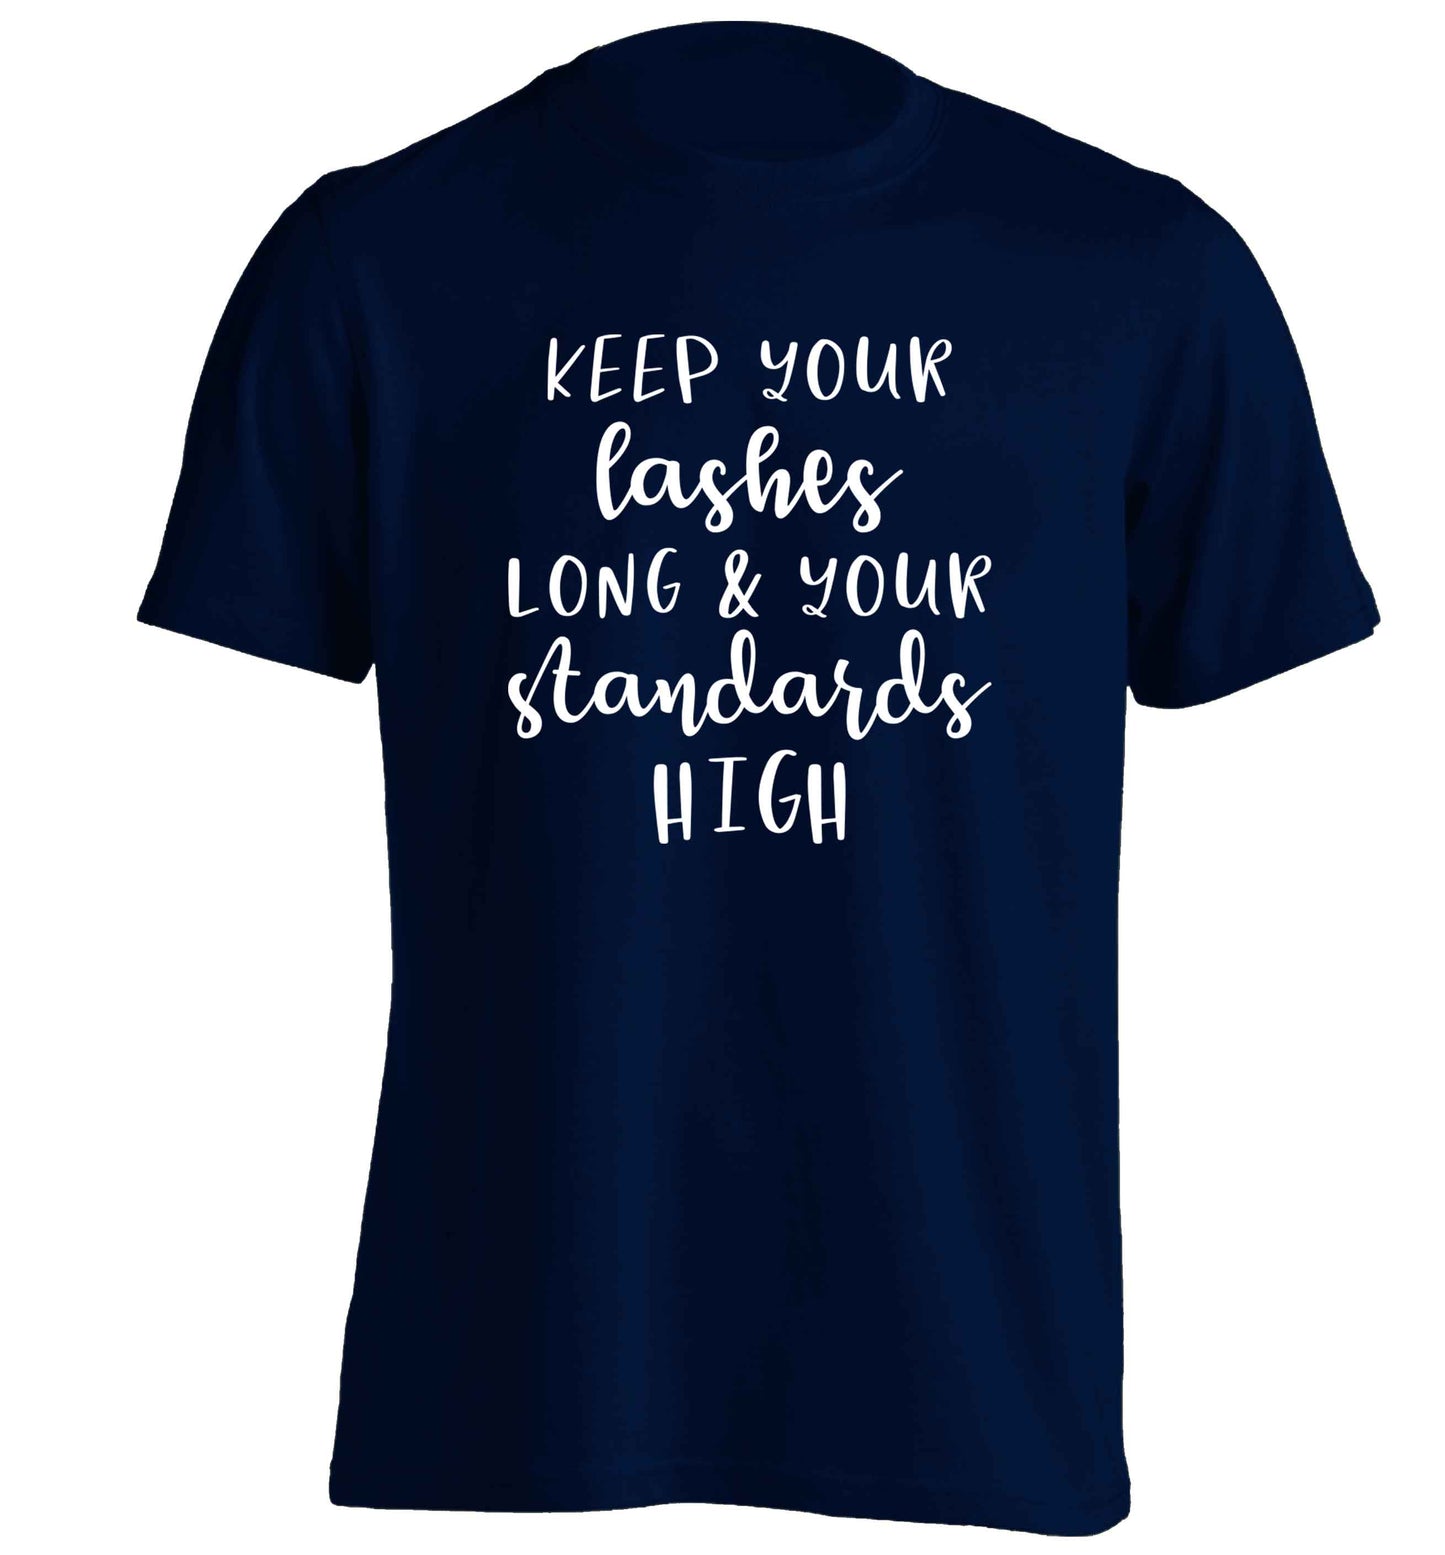 Keep your lashes long and your standards high adults unisex navy Tshirt 2XL